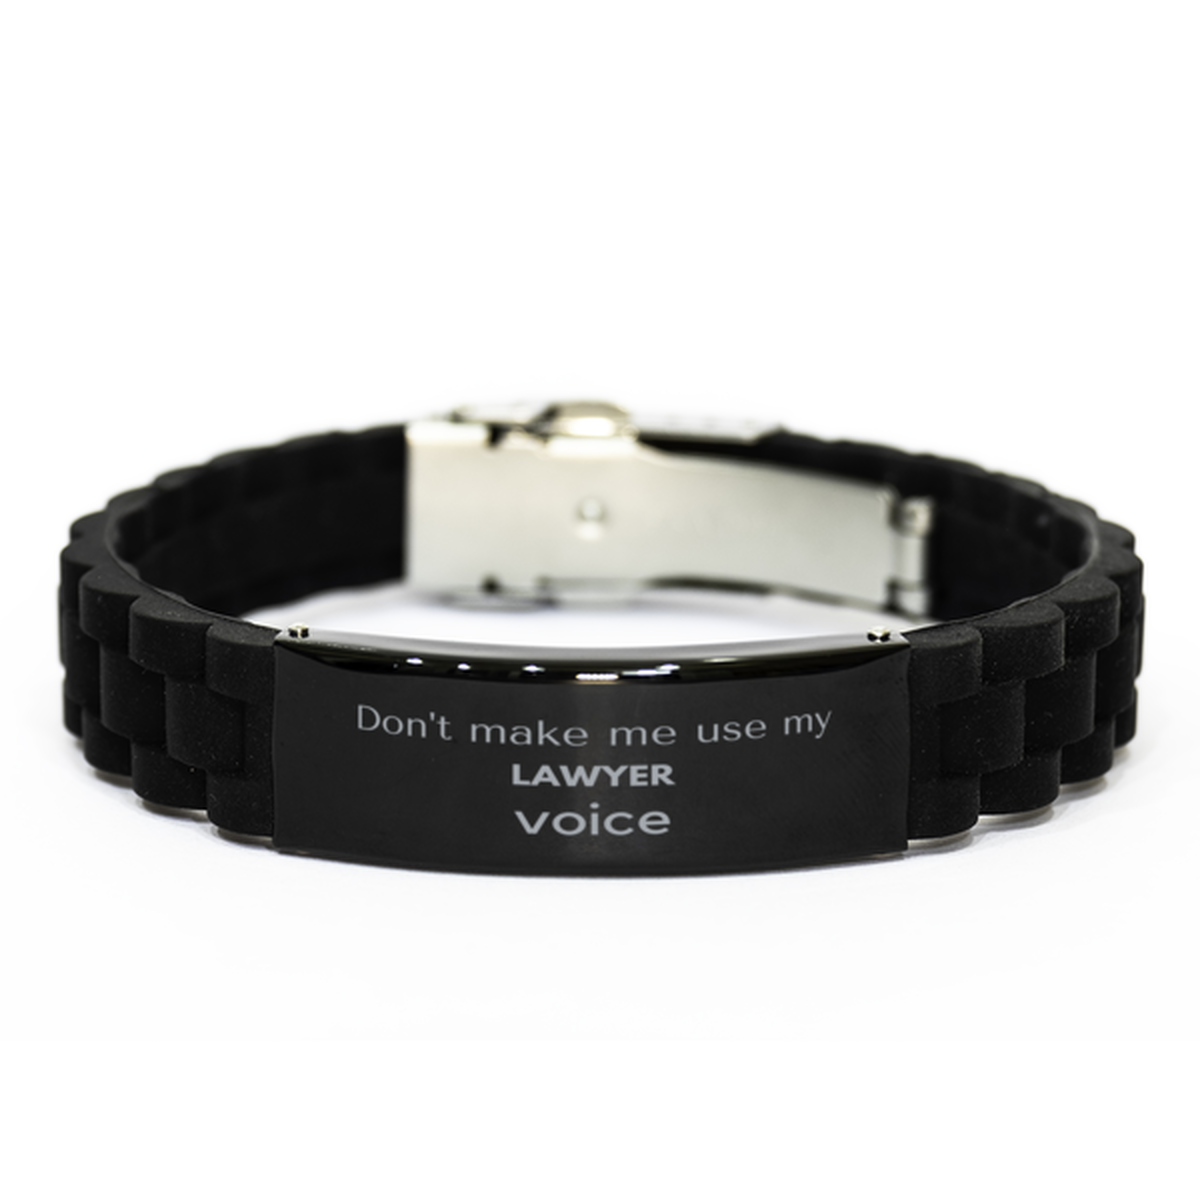 Don't make me use my Lawyer voice, Sarcasm Lawyer Gifts, Christmas Lawyer Black Glidelock Clasp Bracelet Birthday Unique Gifts For Lawyer Coworkers, Men, Women, Colleague, Friends